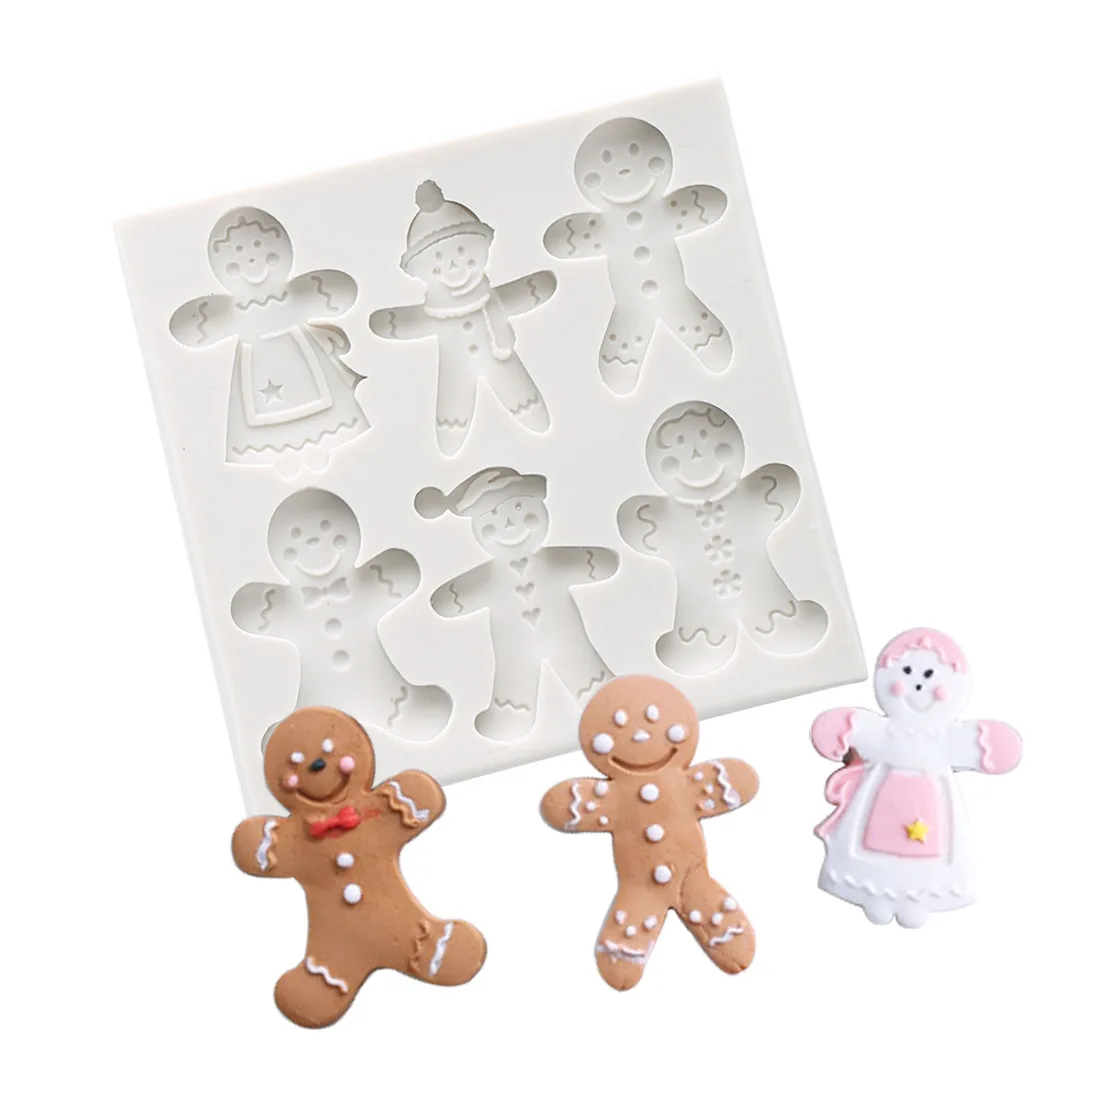 

Christmas Gingerbread Snowman Silicone Mold Xmas Series Fondant Chocolate Cake Decoration Candy Cookie Mould Kitchen Baking Tool